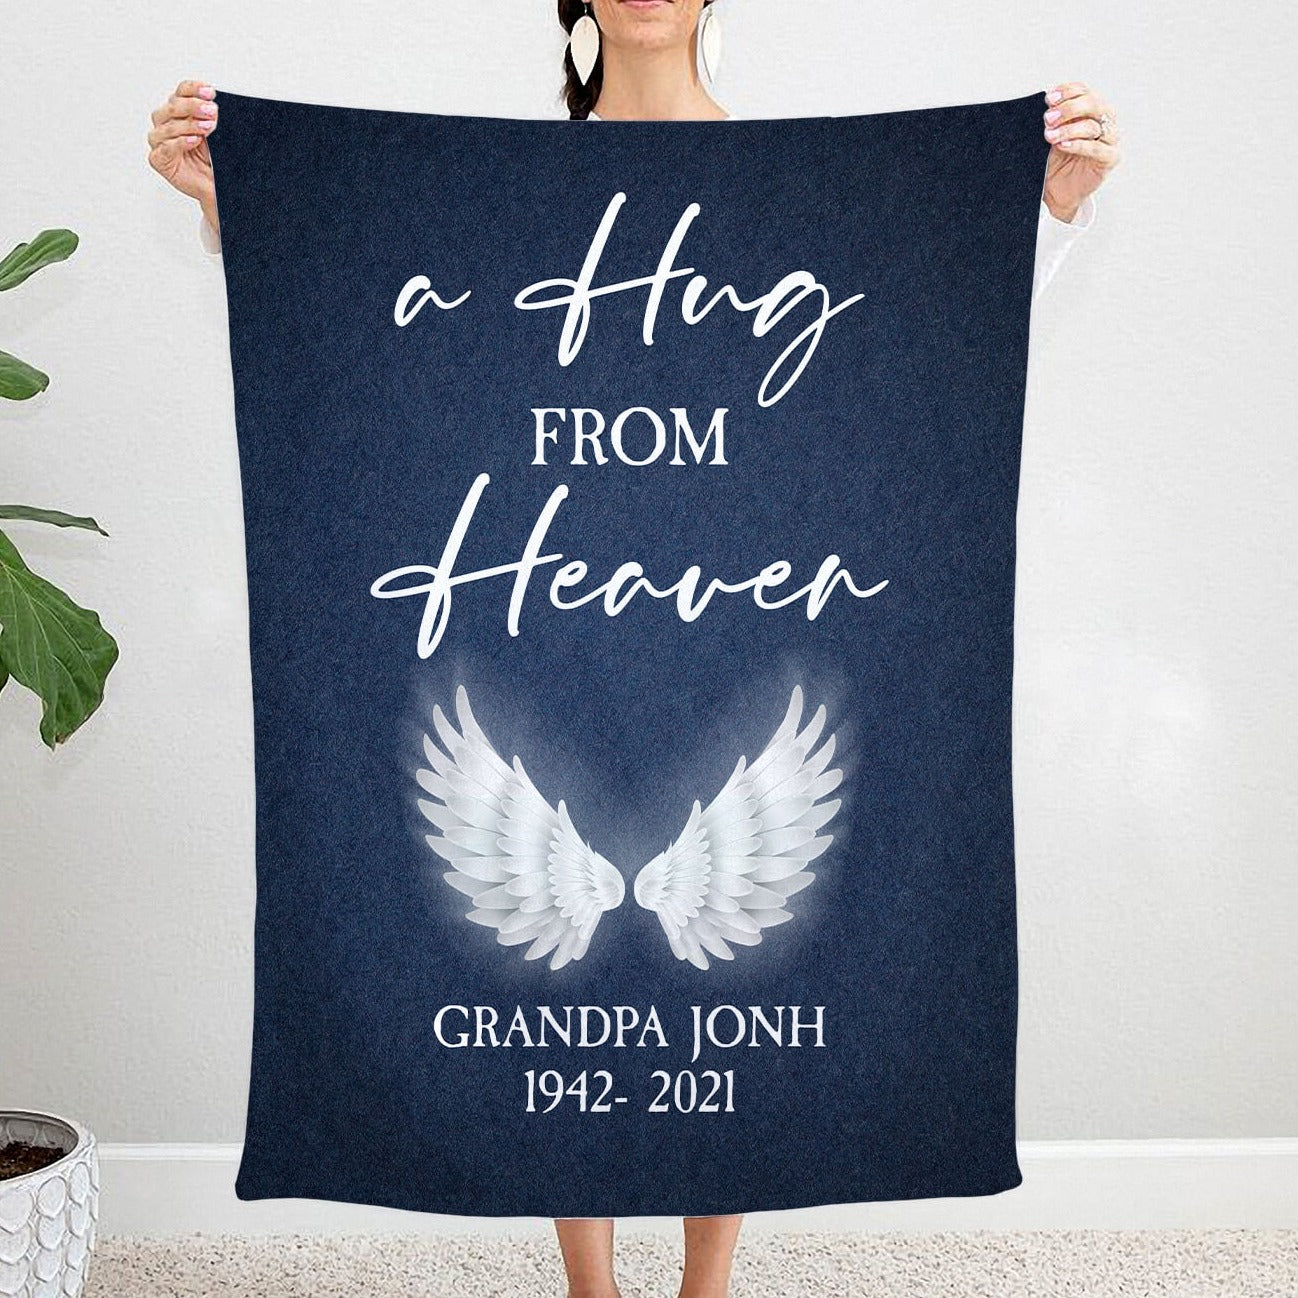 Personalized Throw Blanket Memorial, Mom Memorial, Memorial Gift, Hug From  Heaven, Sympathy Gift, Hug From Me to You, Photo Blanket 